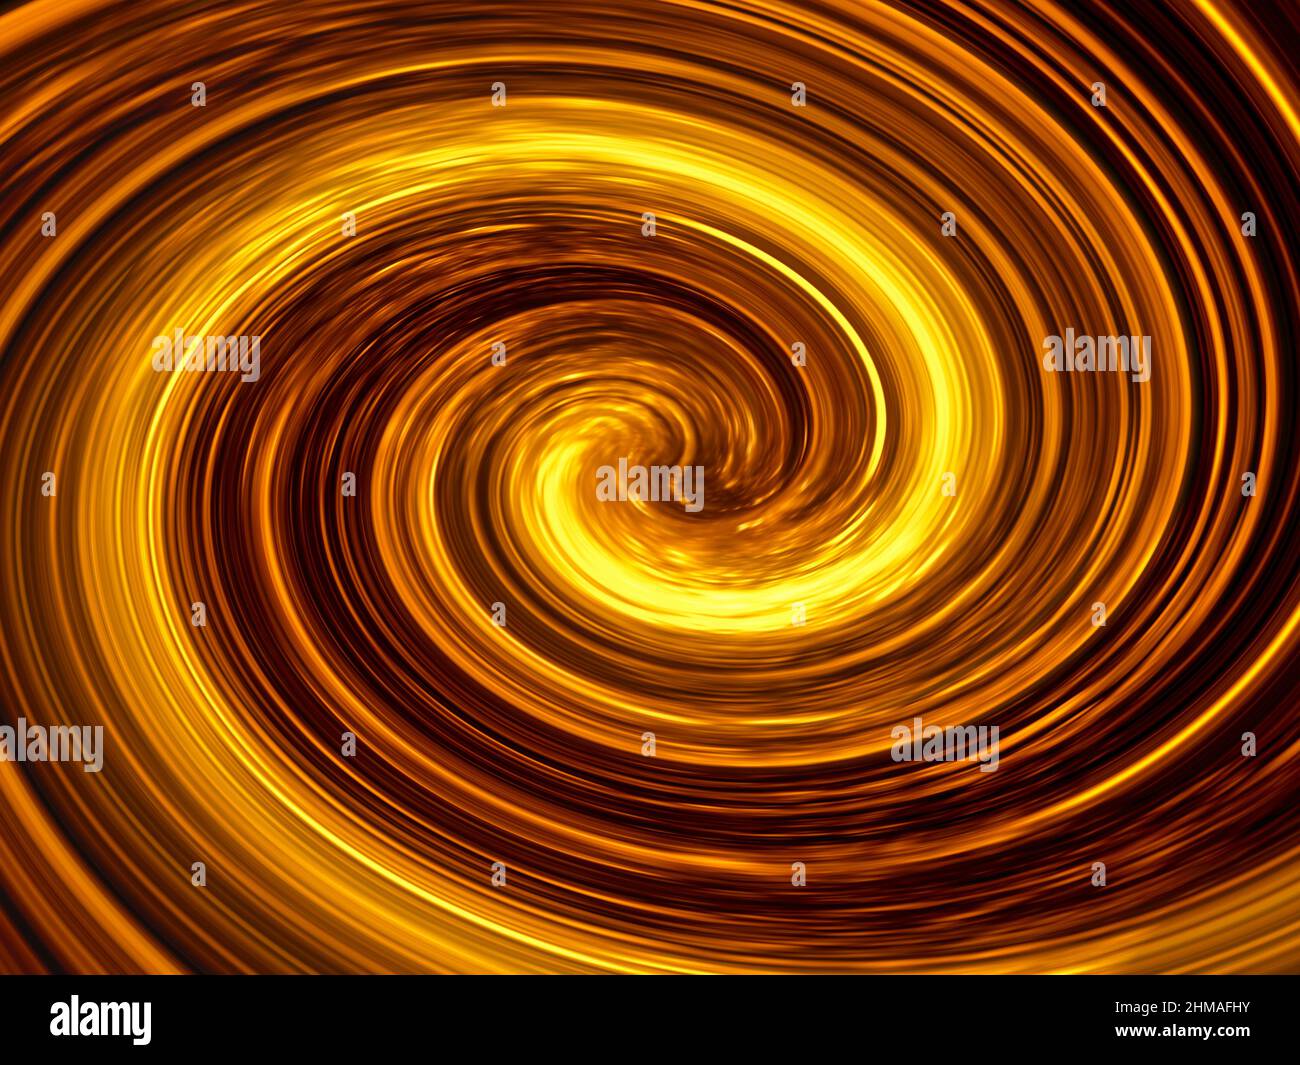 Golden fractal spiral with metallic luster - abstract illustration Stock Photo